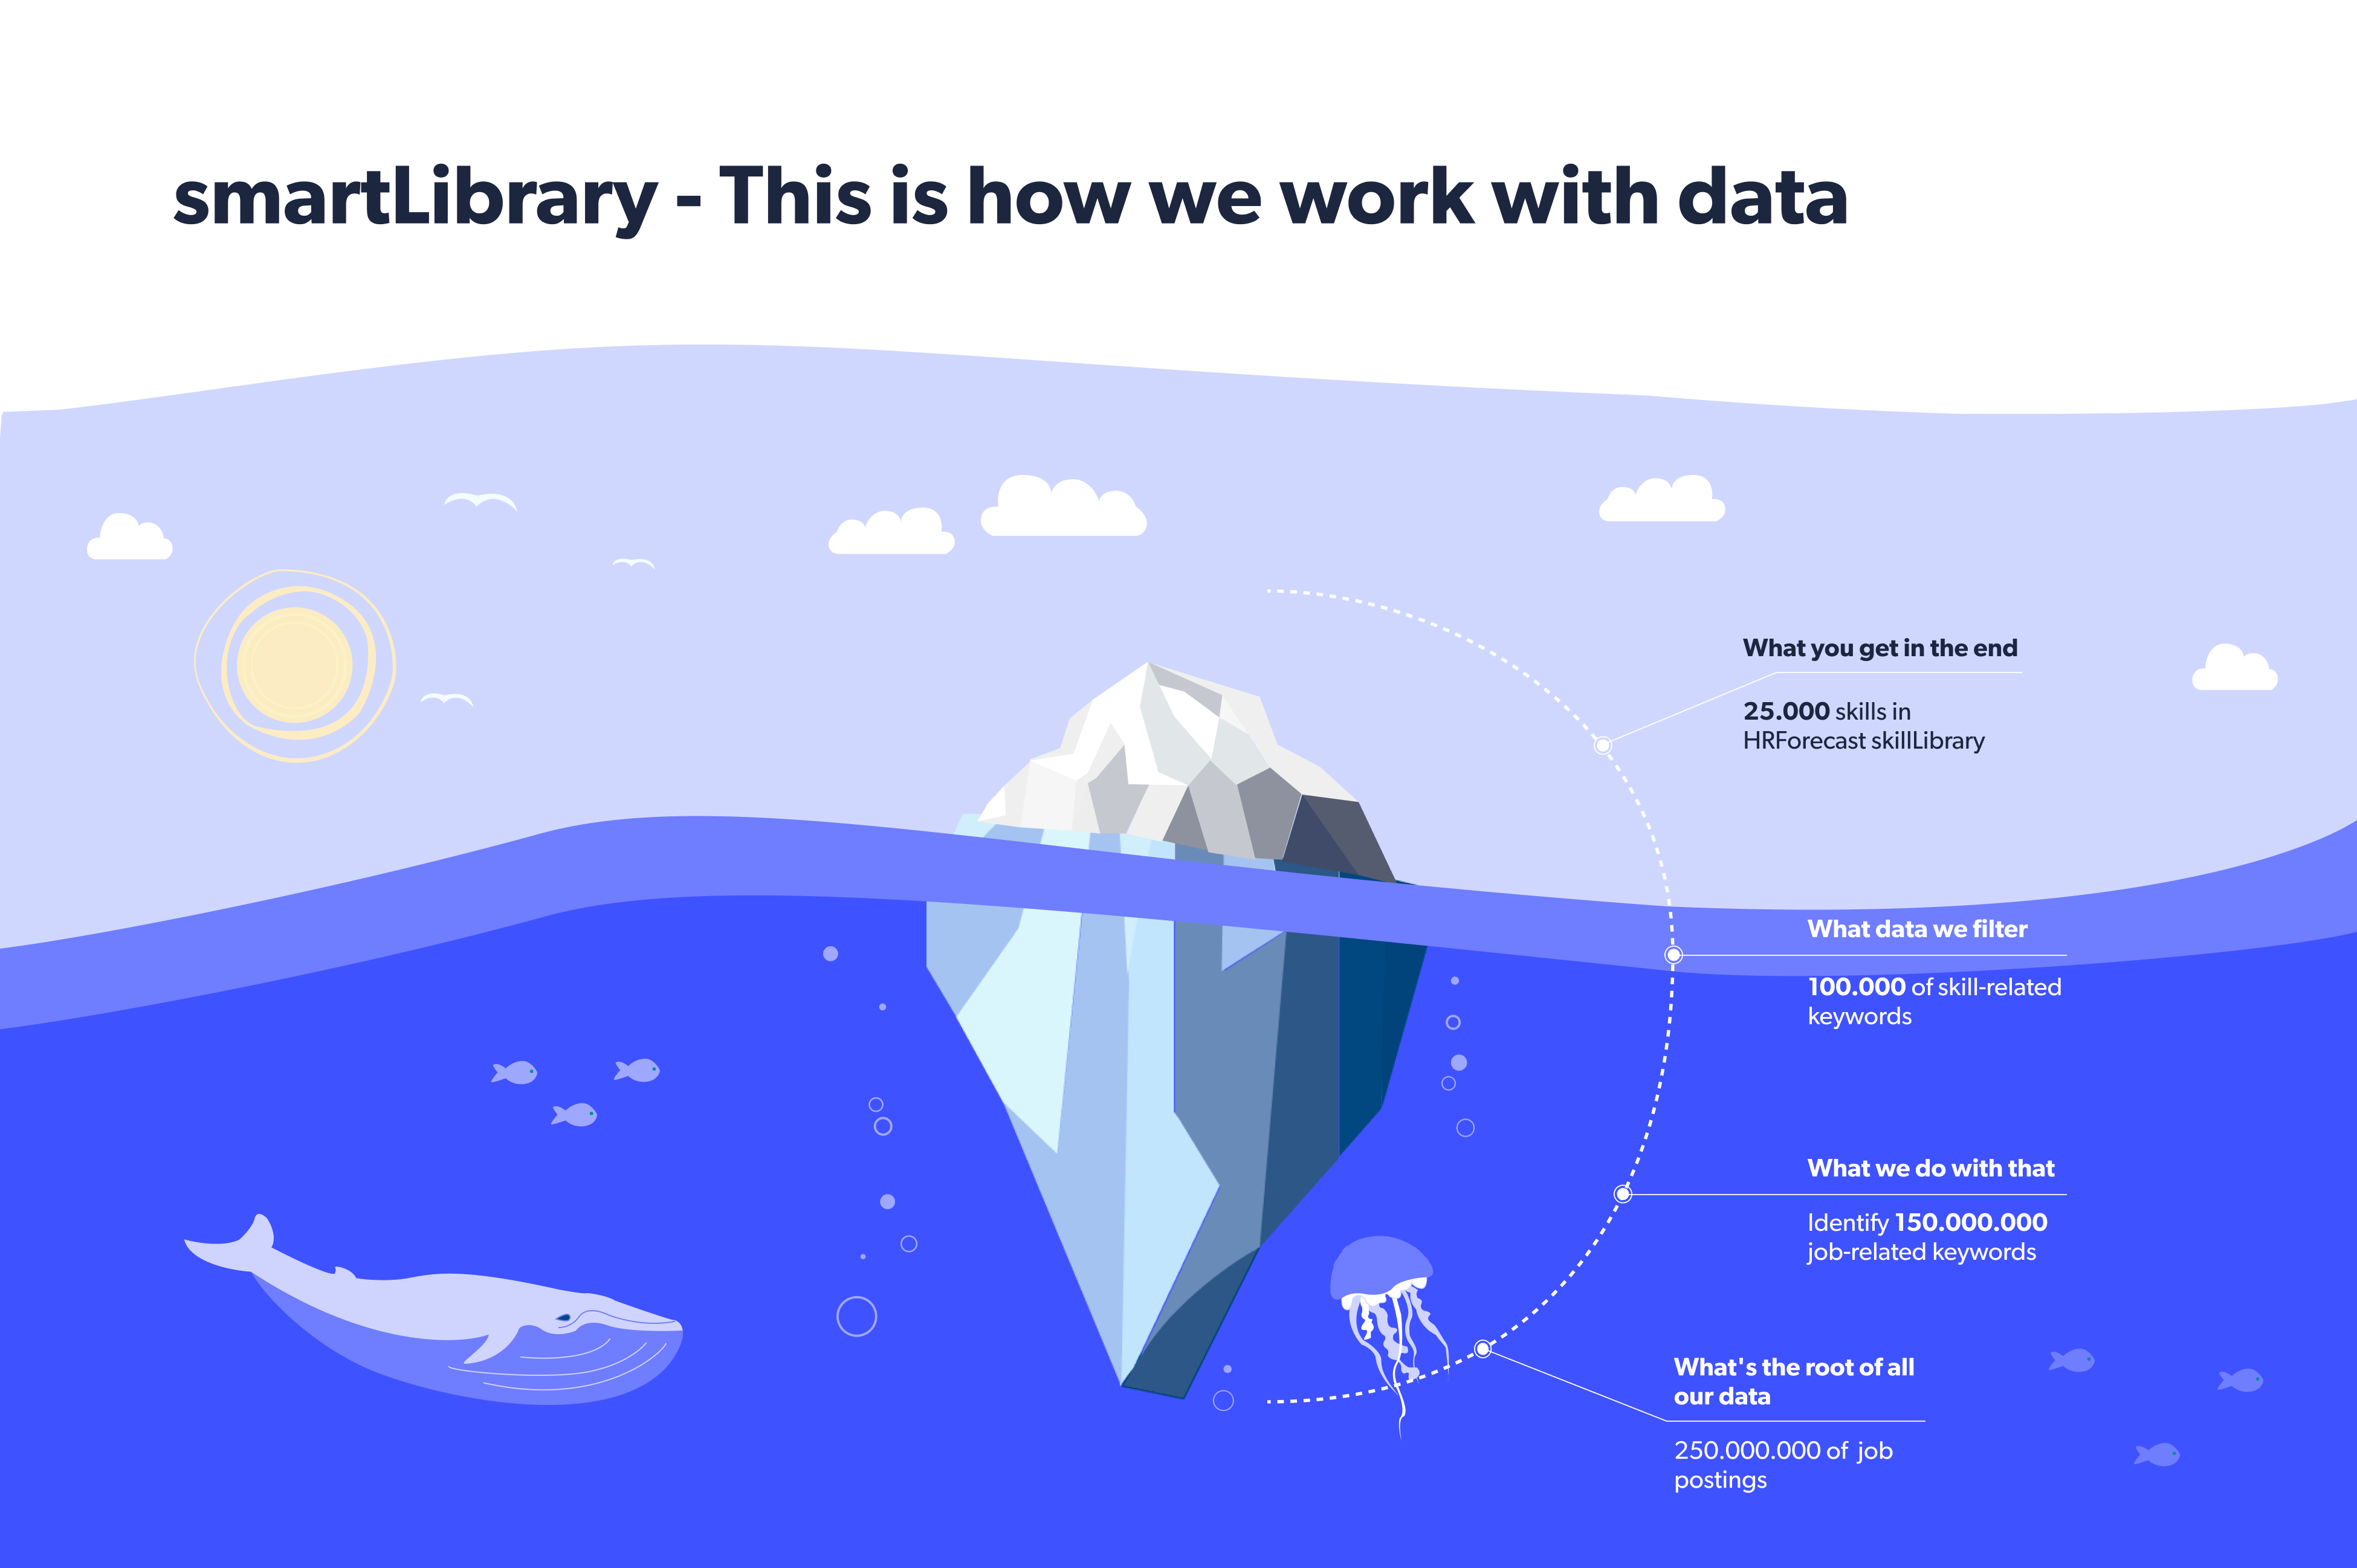 smartLibrary - This is how we work with data